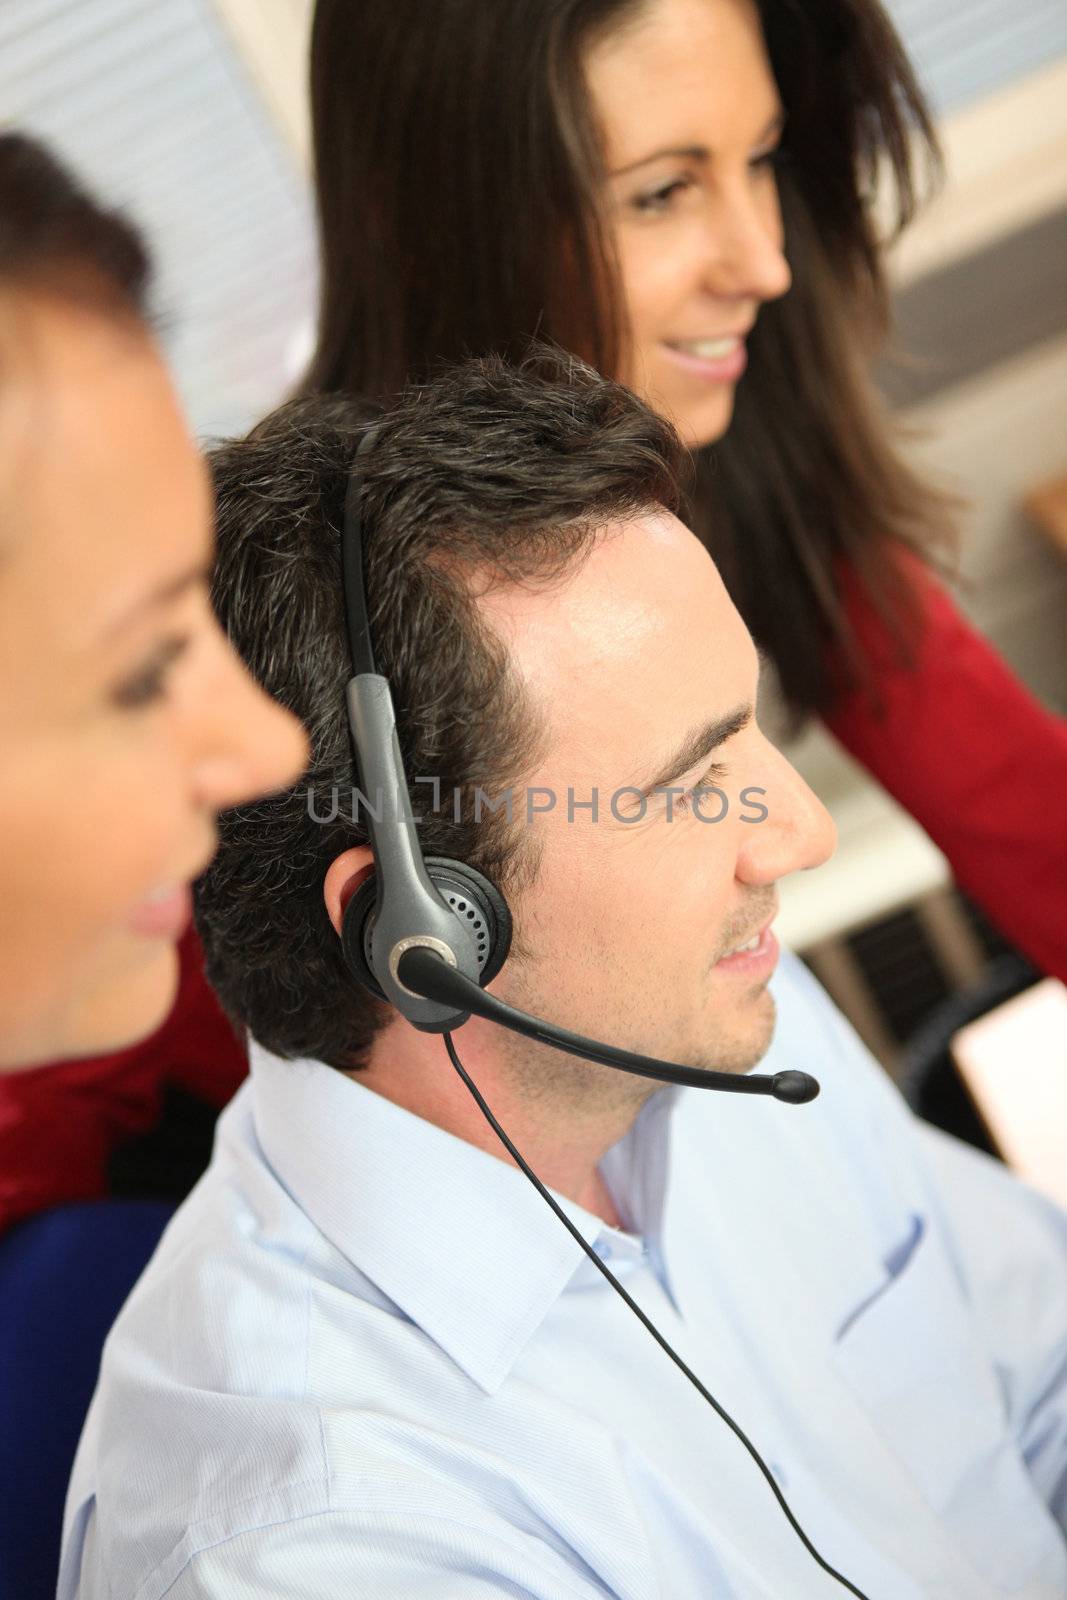 Phone operator in office by phovoir